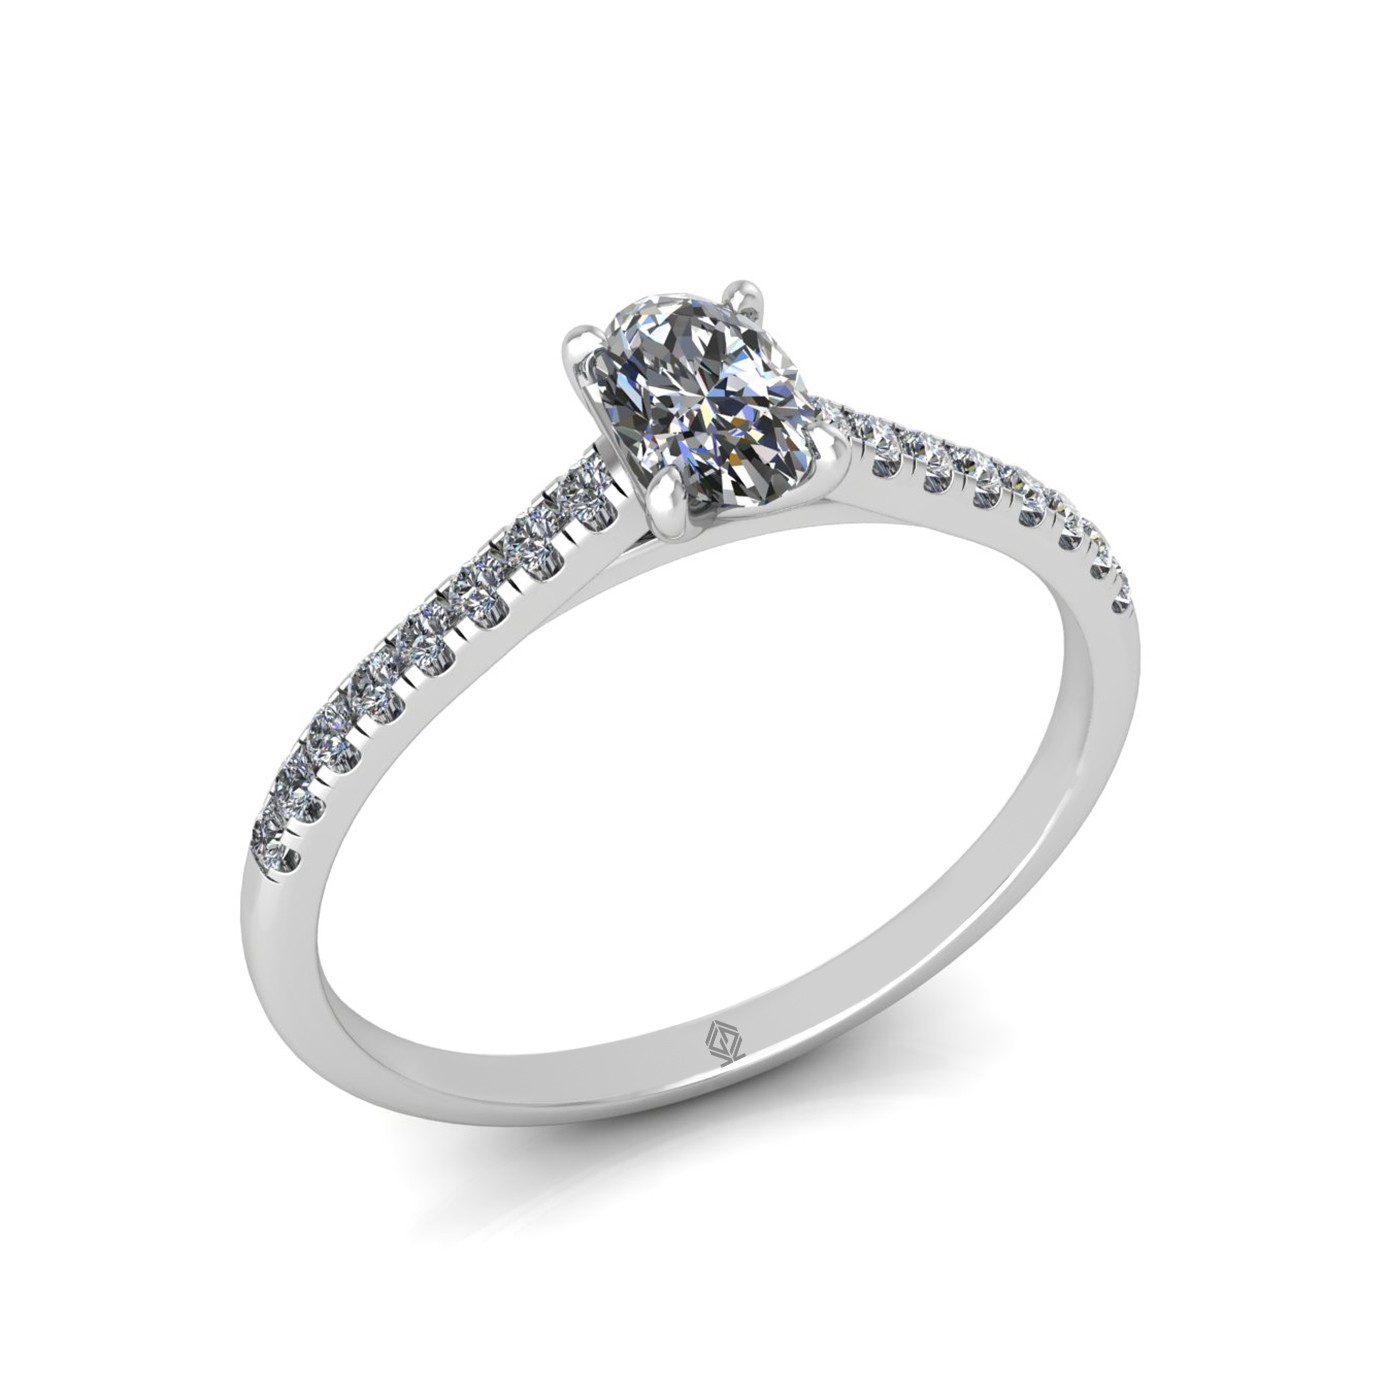 18k white gold  0,30 ct 4 prongs oval cut diamond engagement ring with whisper thin pavÉ set band